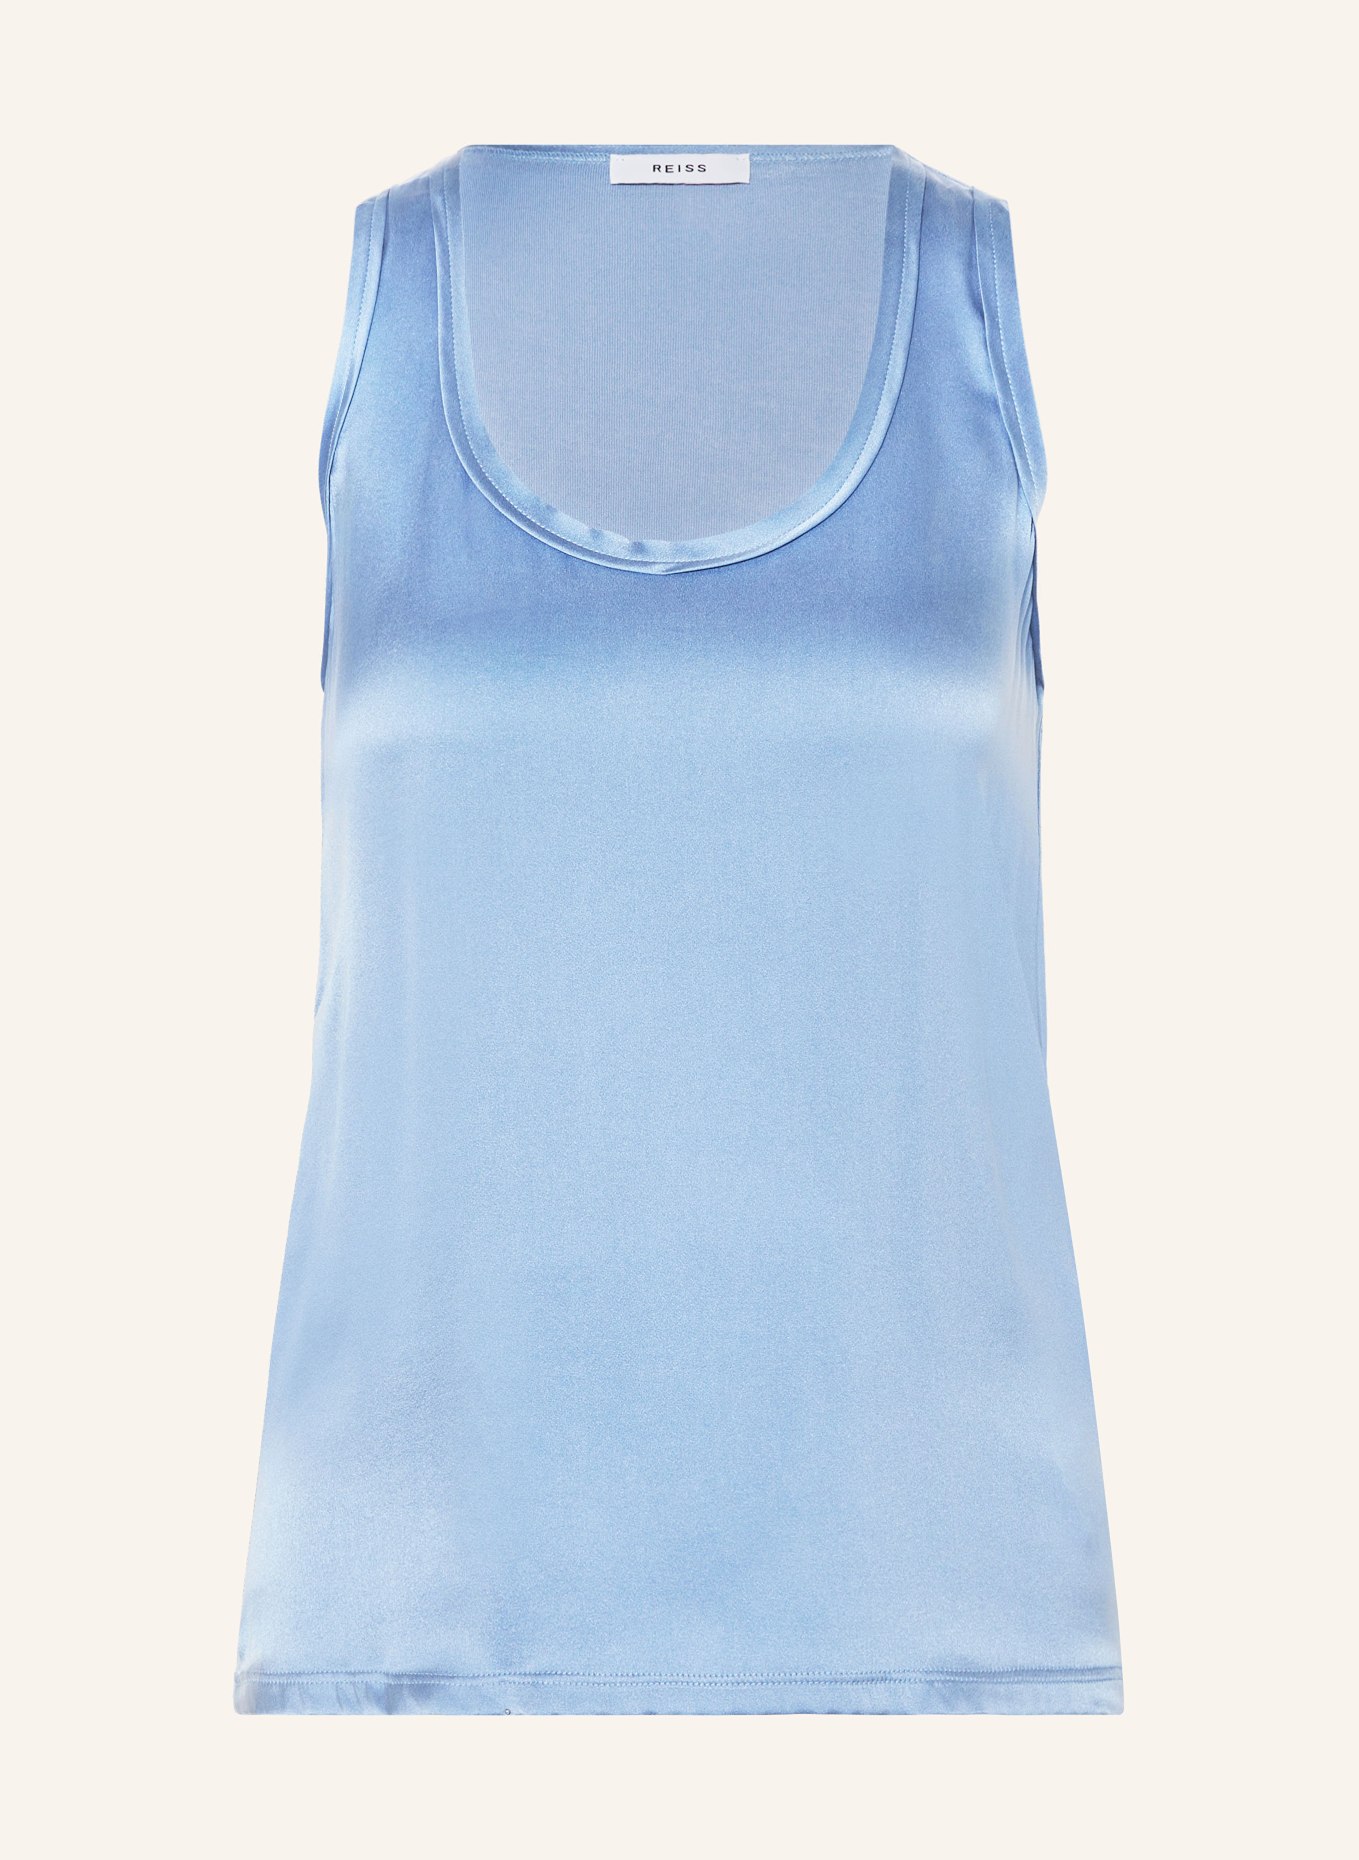 REISS Top RILEY in mixed materials, Color: BLUE (Image 1)